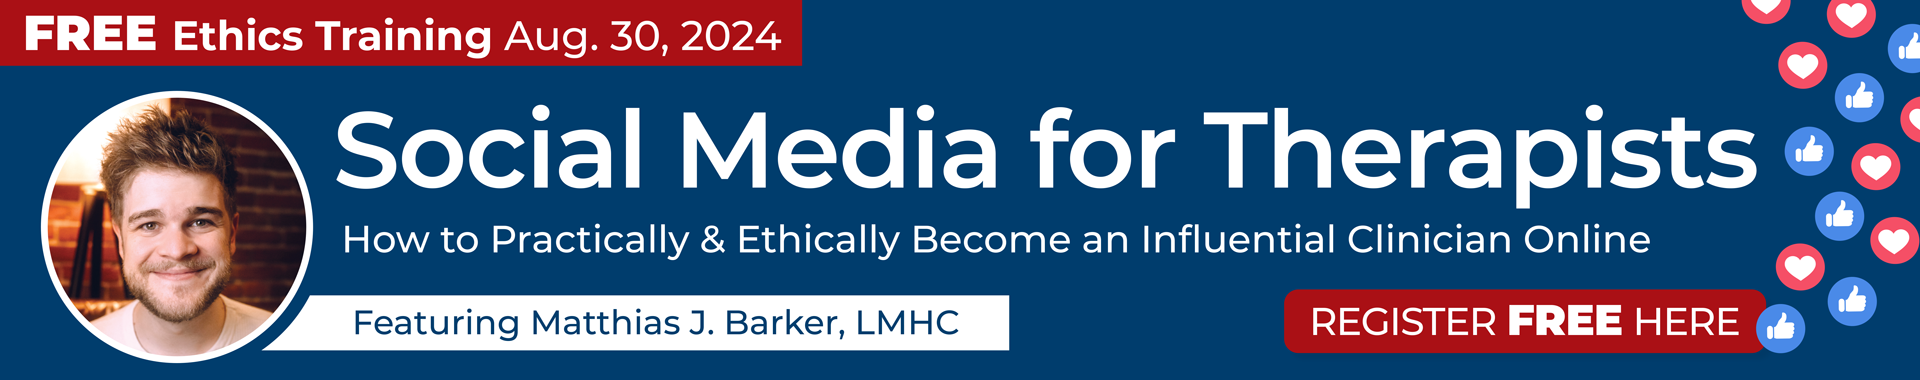 Social Media for Therapists: How to Practically & Ethically Become an Influential Clinician Online